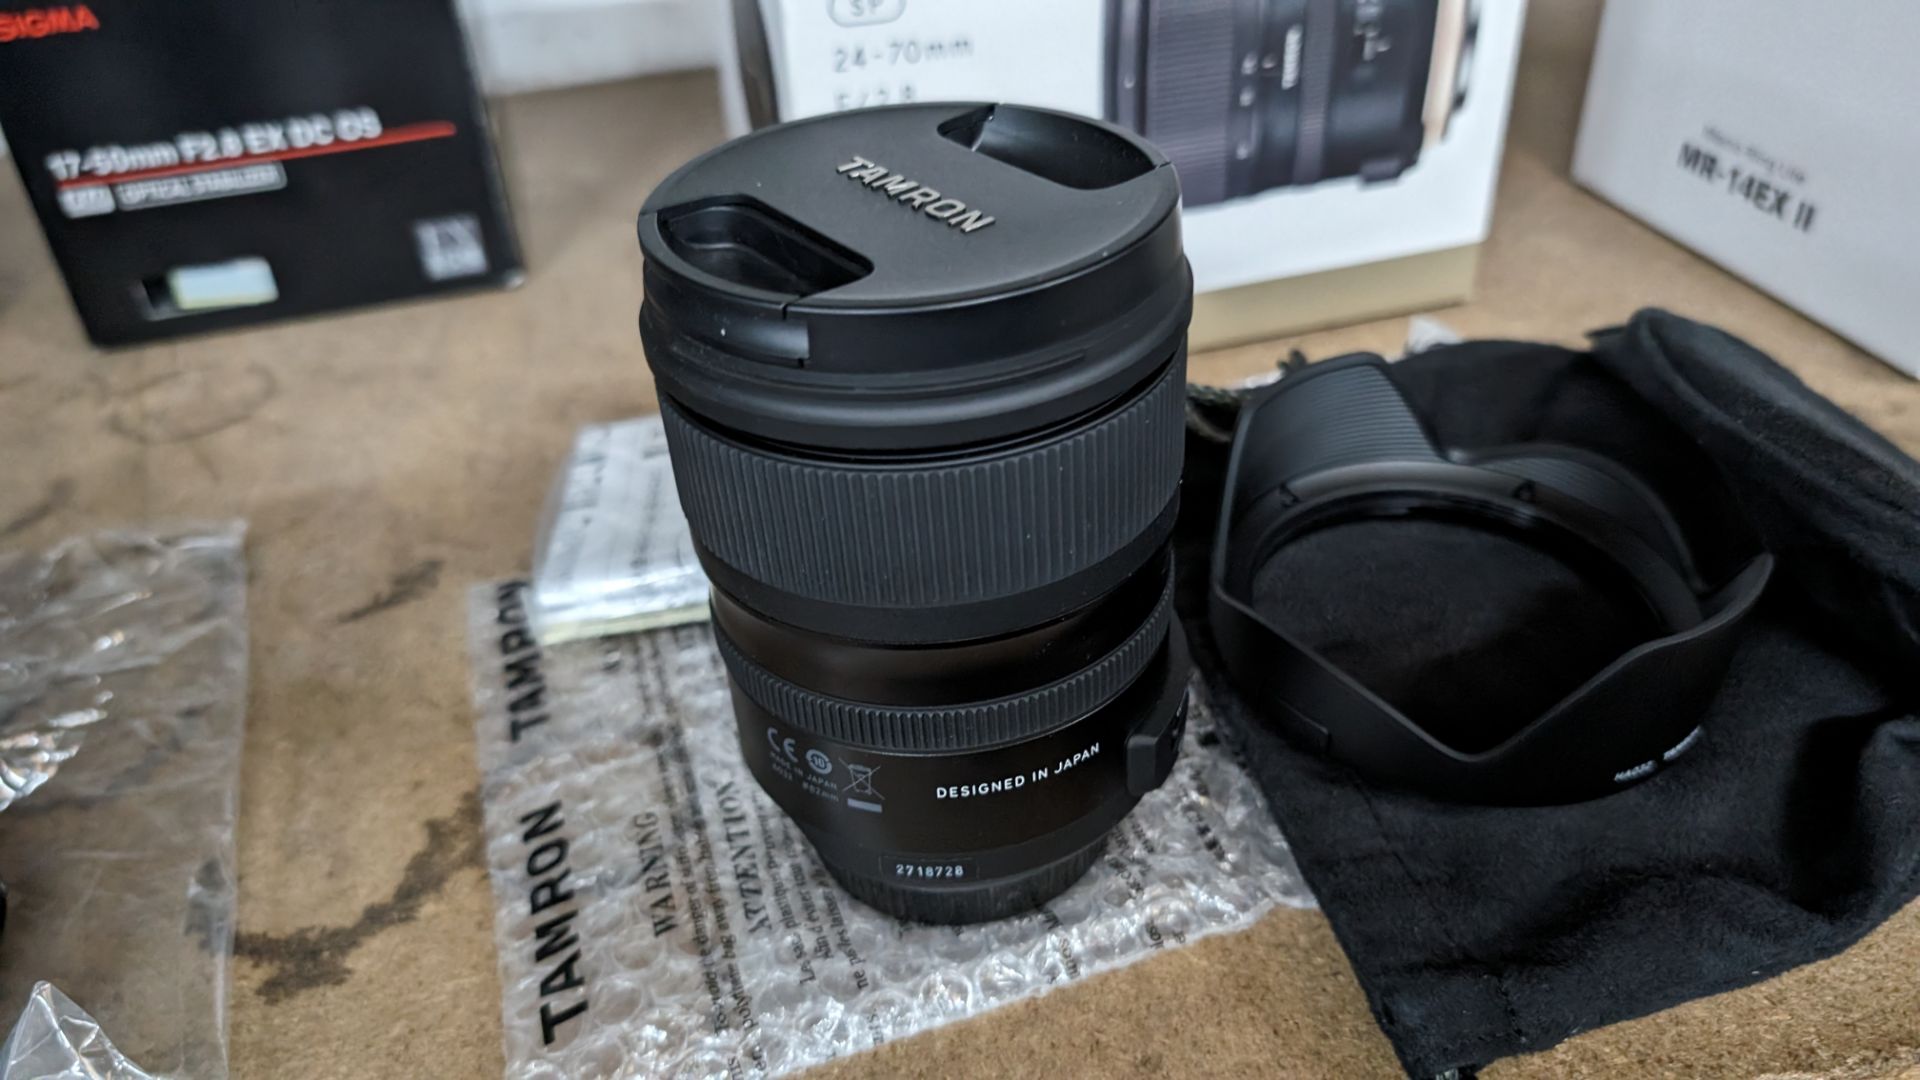 Tamron SP 24-70mm f/2.8 Di VC USD G2 lens, including soft carry case and attachment - Image 8 of 10